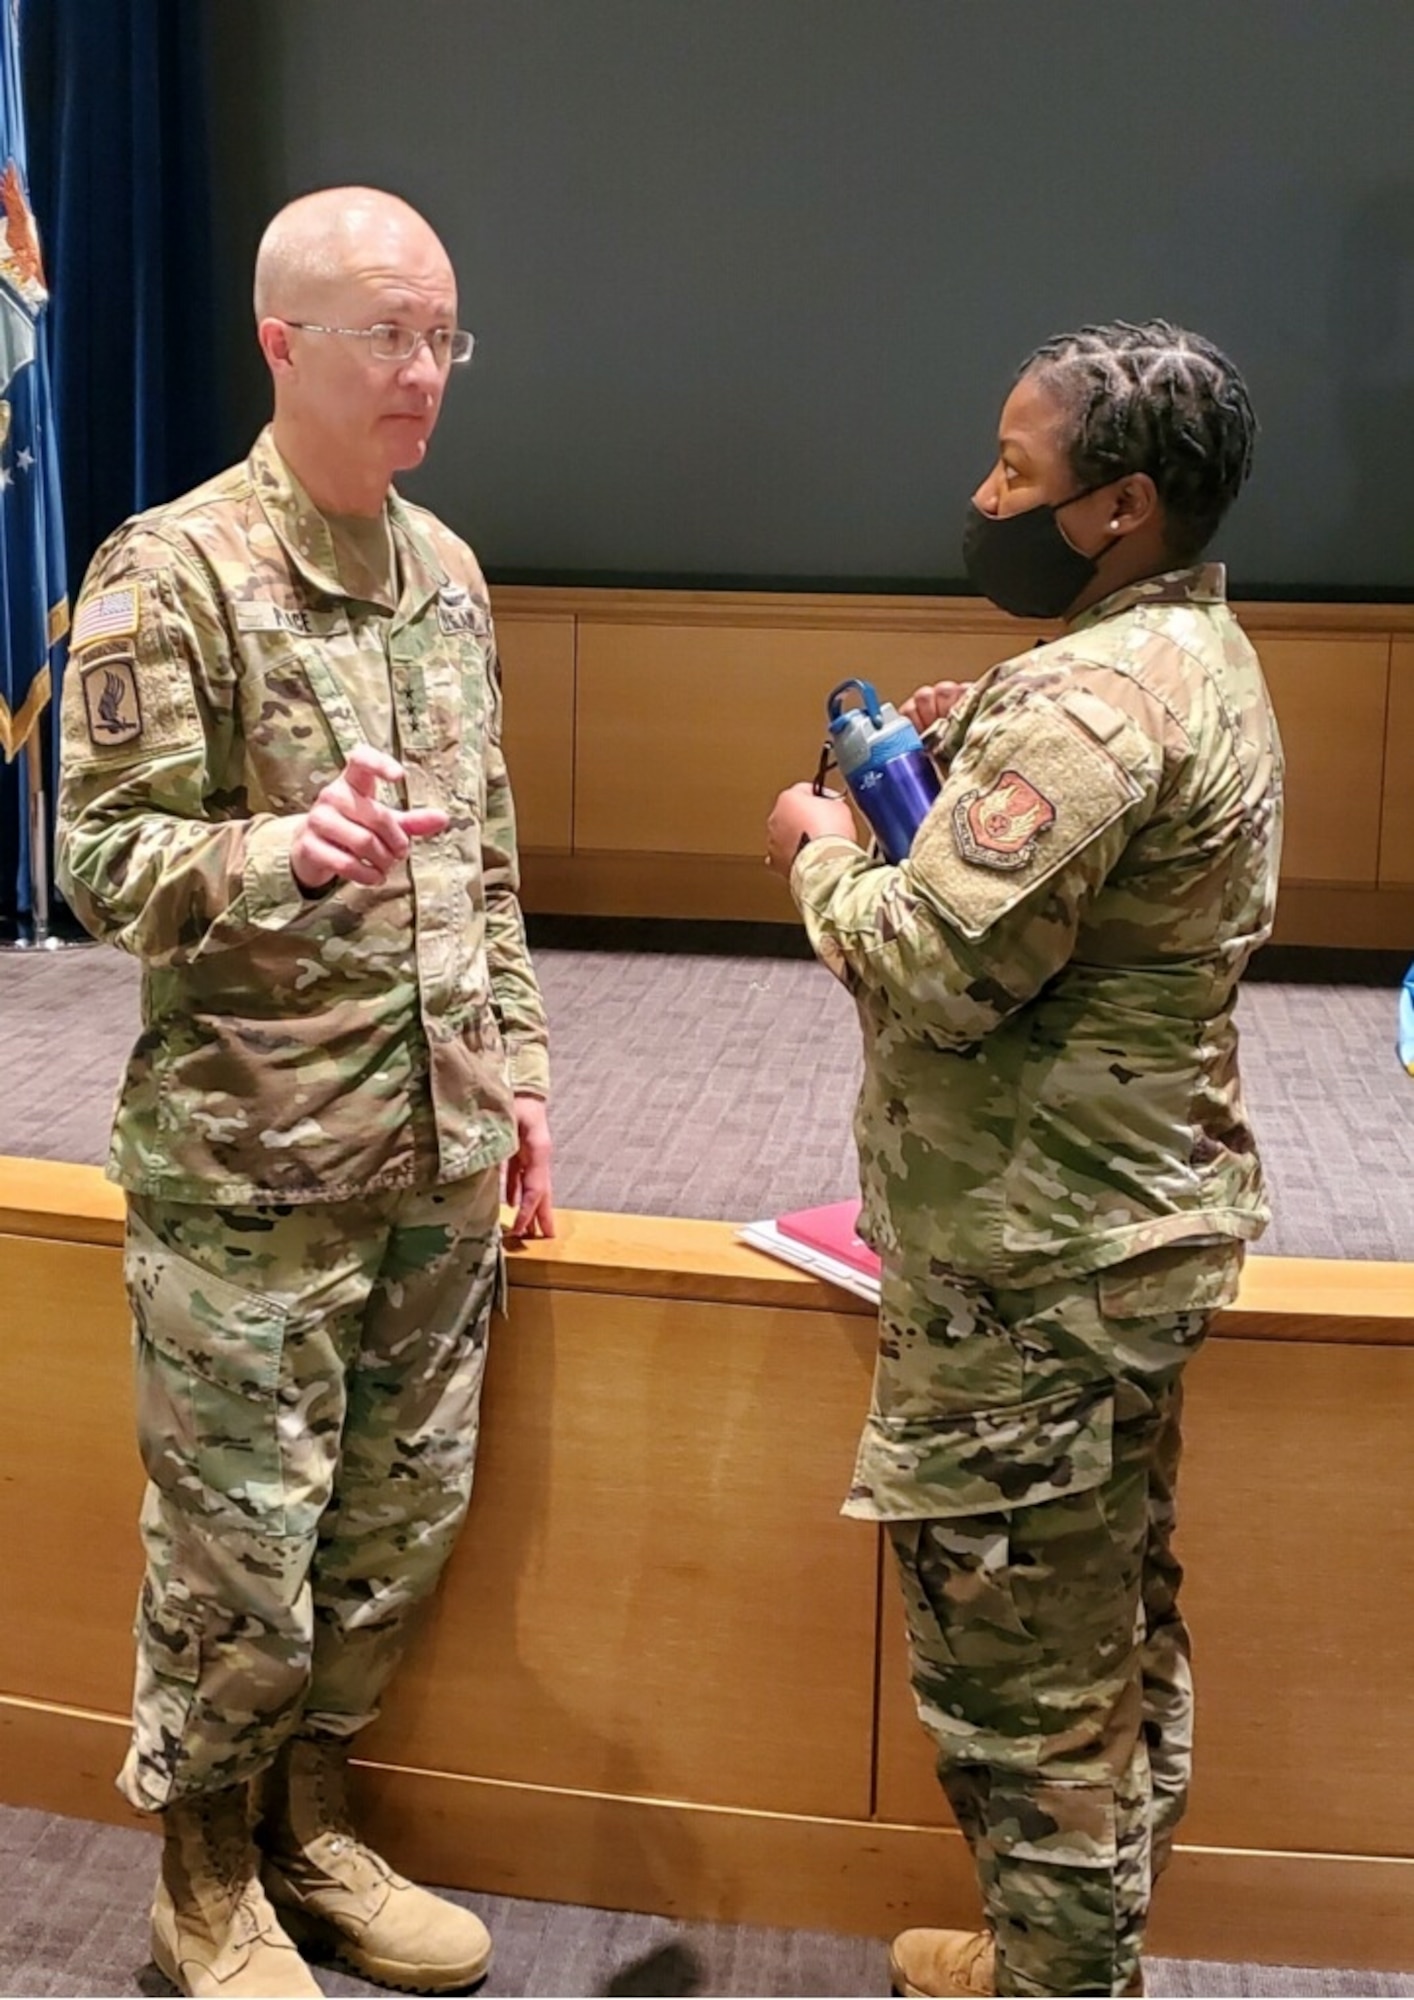 While visiting the Wright-Patterson Medical Center, Army Lt. Gen. Ronald Place addresses a question from Air Force Master Sgt. Portia Les'Pere at Wright-Patterson Air Force base, Ohio on April 12, 2022. Gragg visited the medical center to see its missions and capabilities firsthand. (U.S. Air Force photo by Kenneth Stiles)